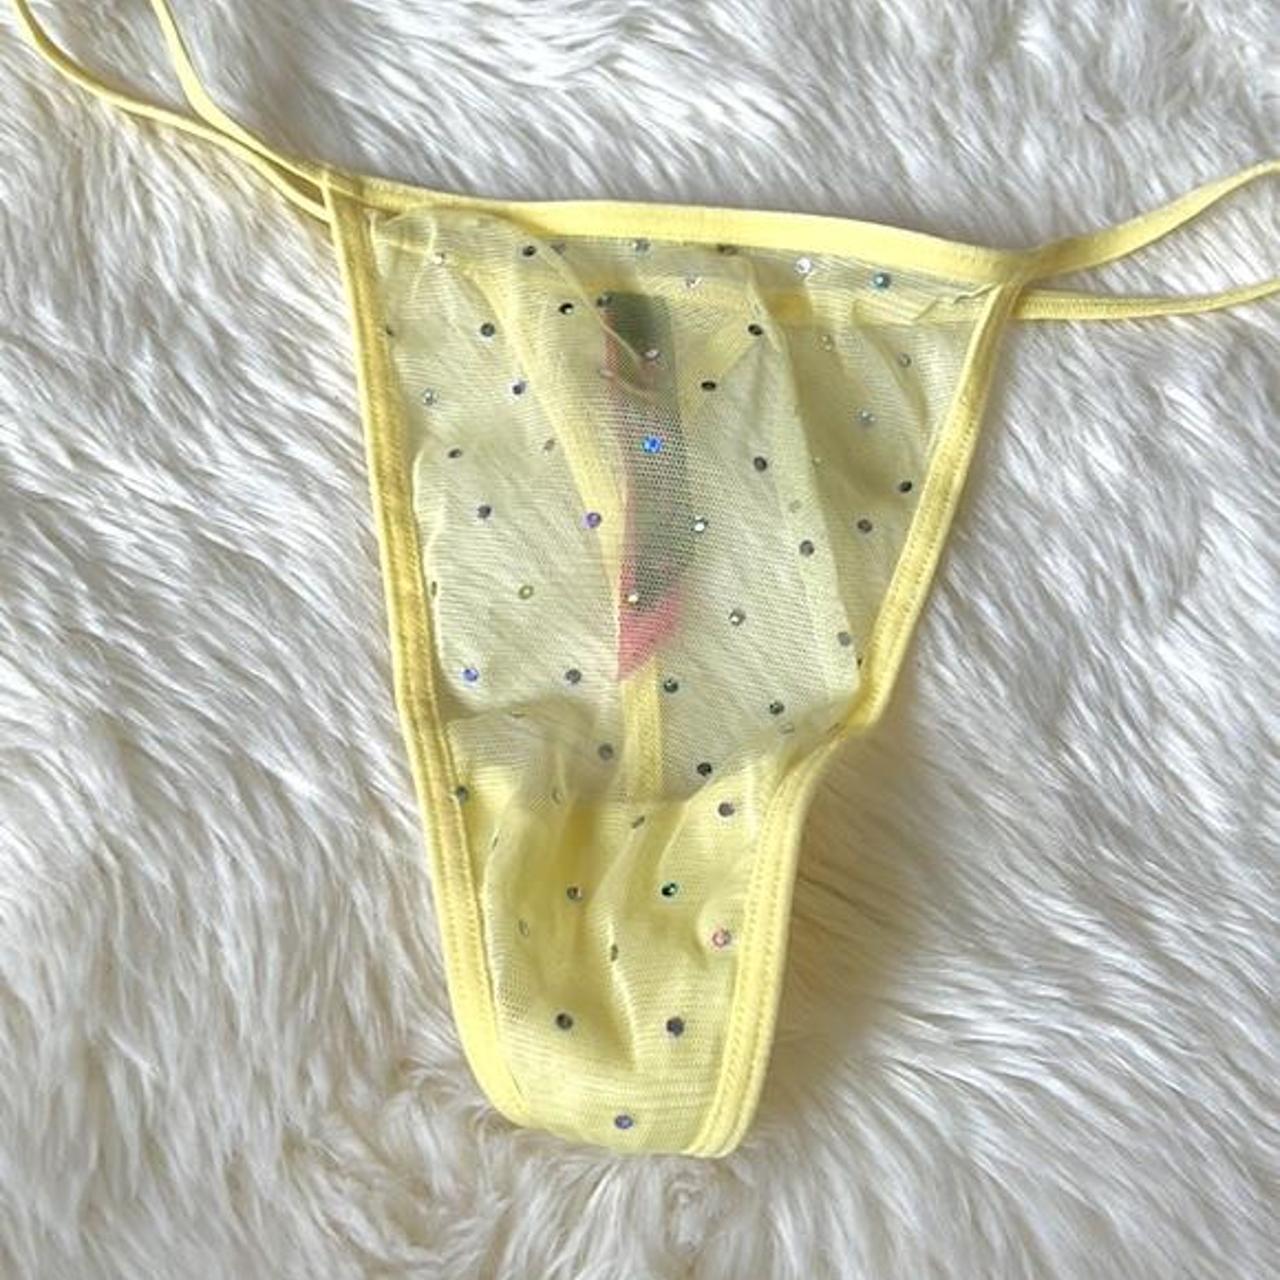 Victoria's Secret Thong Sexy Little Things Bling - Depop